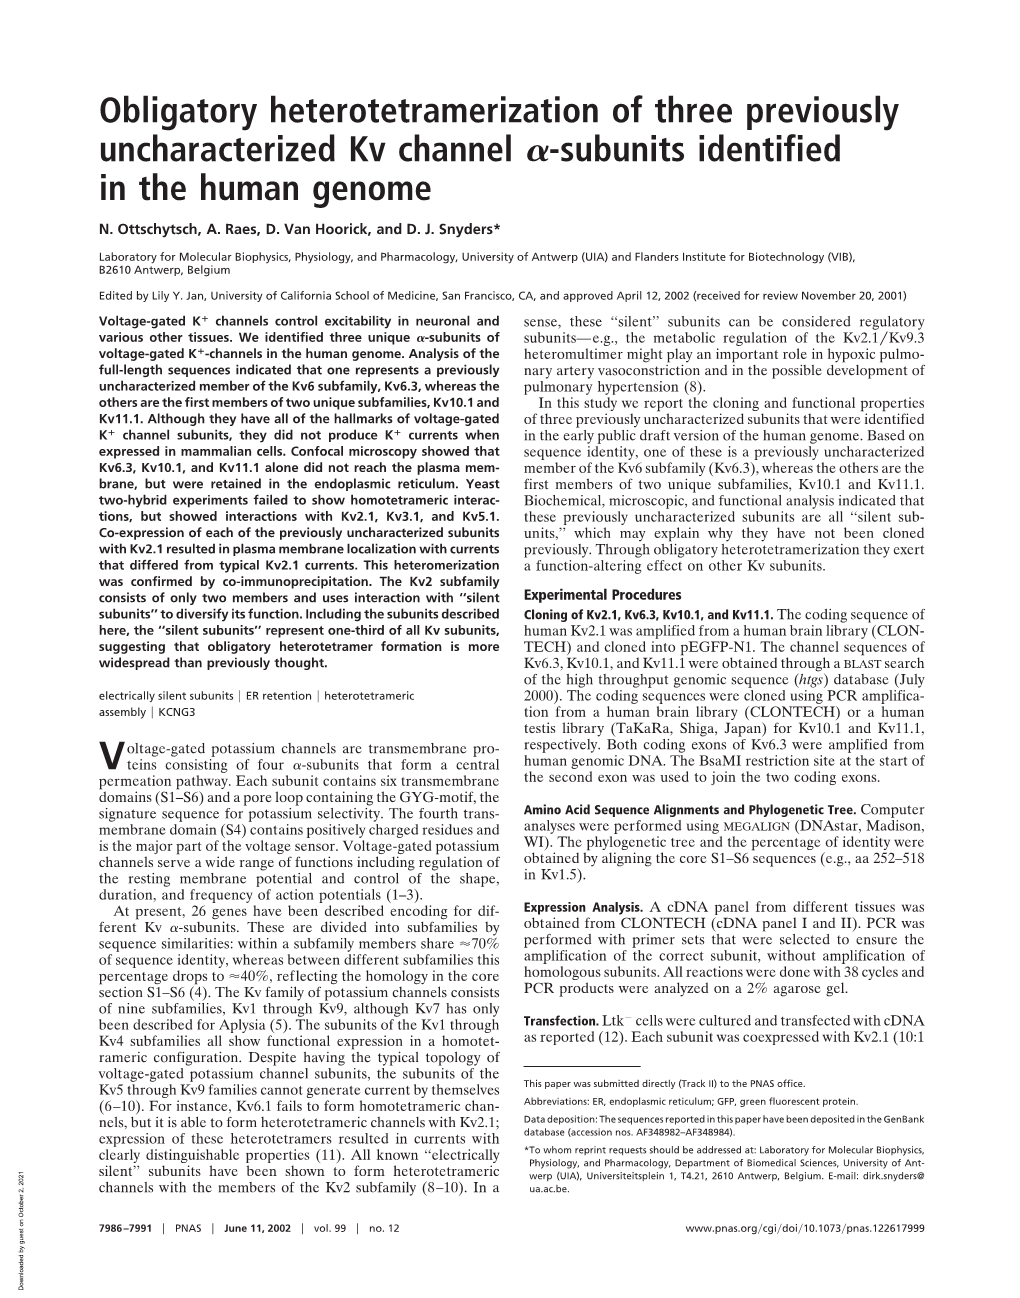 Subunits Identified in the Human Genome